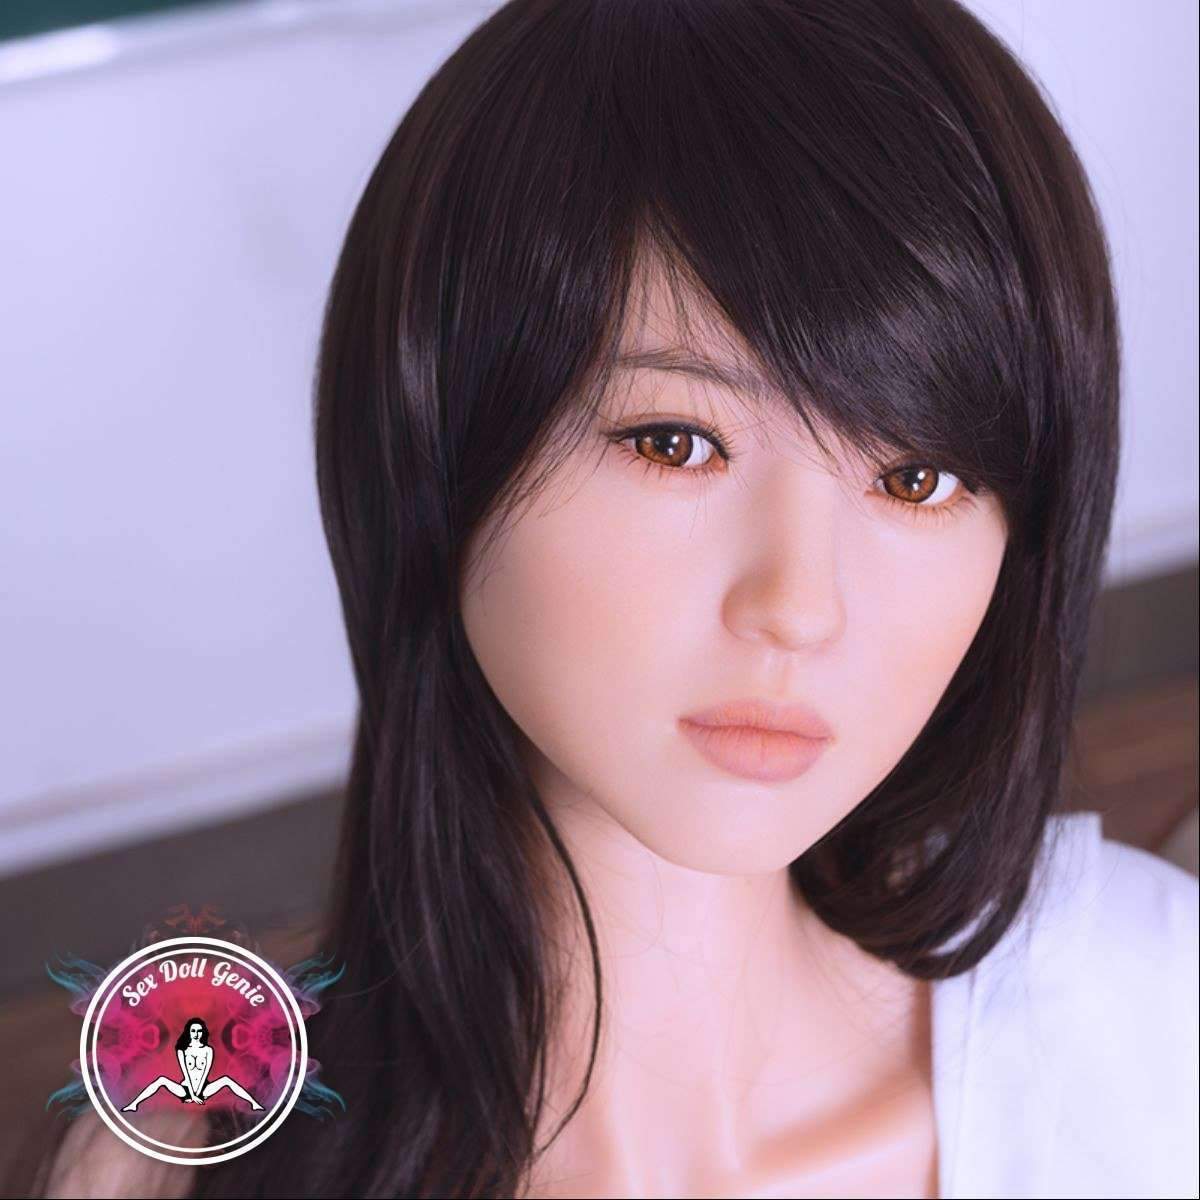 DS Doll - 167evo - Sharon Head - Typ 2 D Cup Silikonpuppe-15